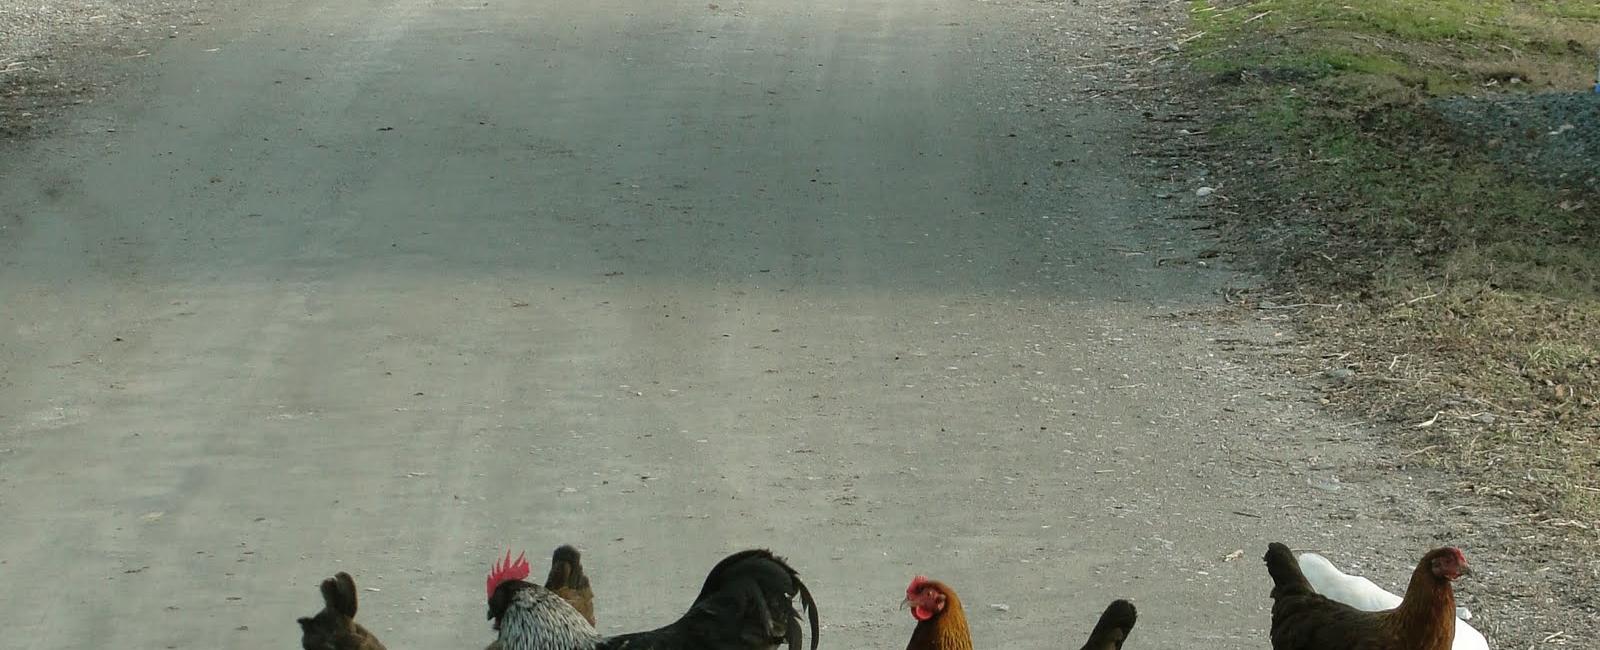 In quitman georgia it is illegal for chickens to cross the road if you own chickens or other similar animals you can receive a high fine if they are on public roads